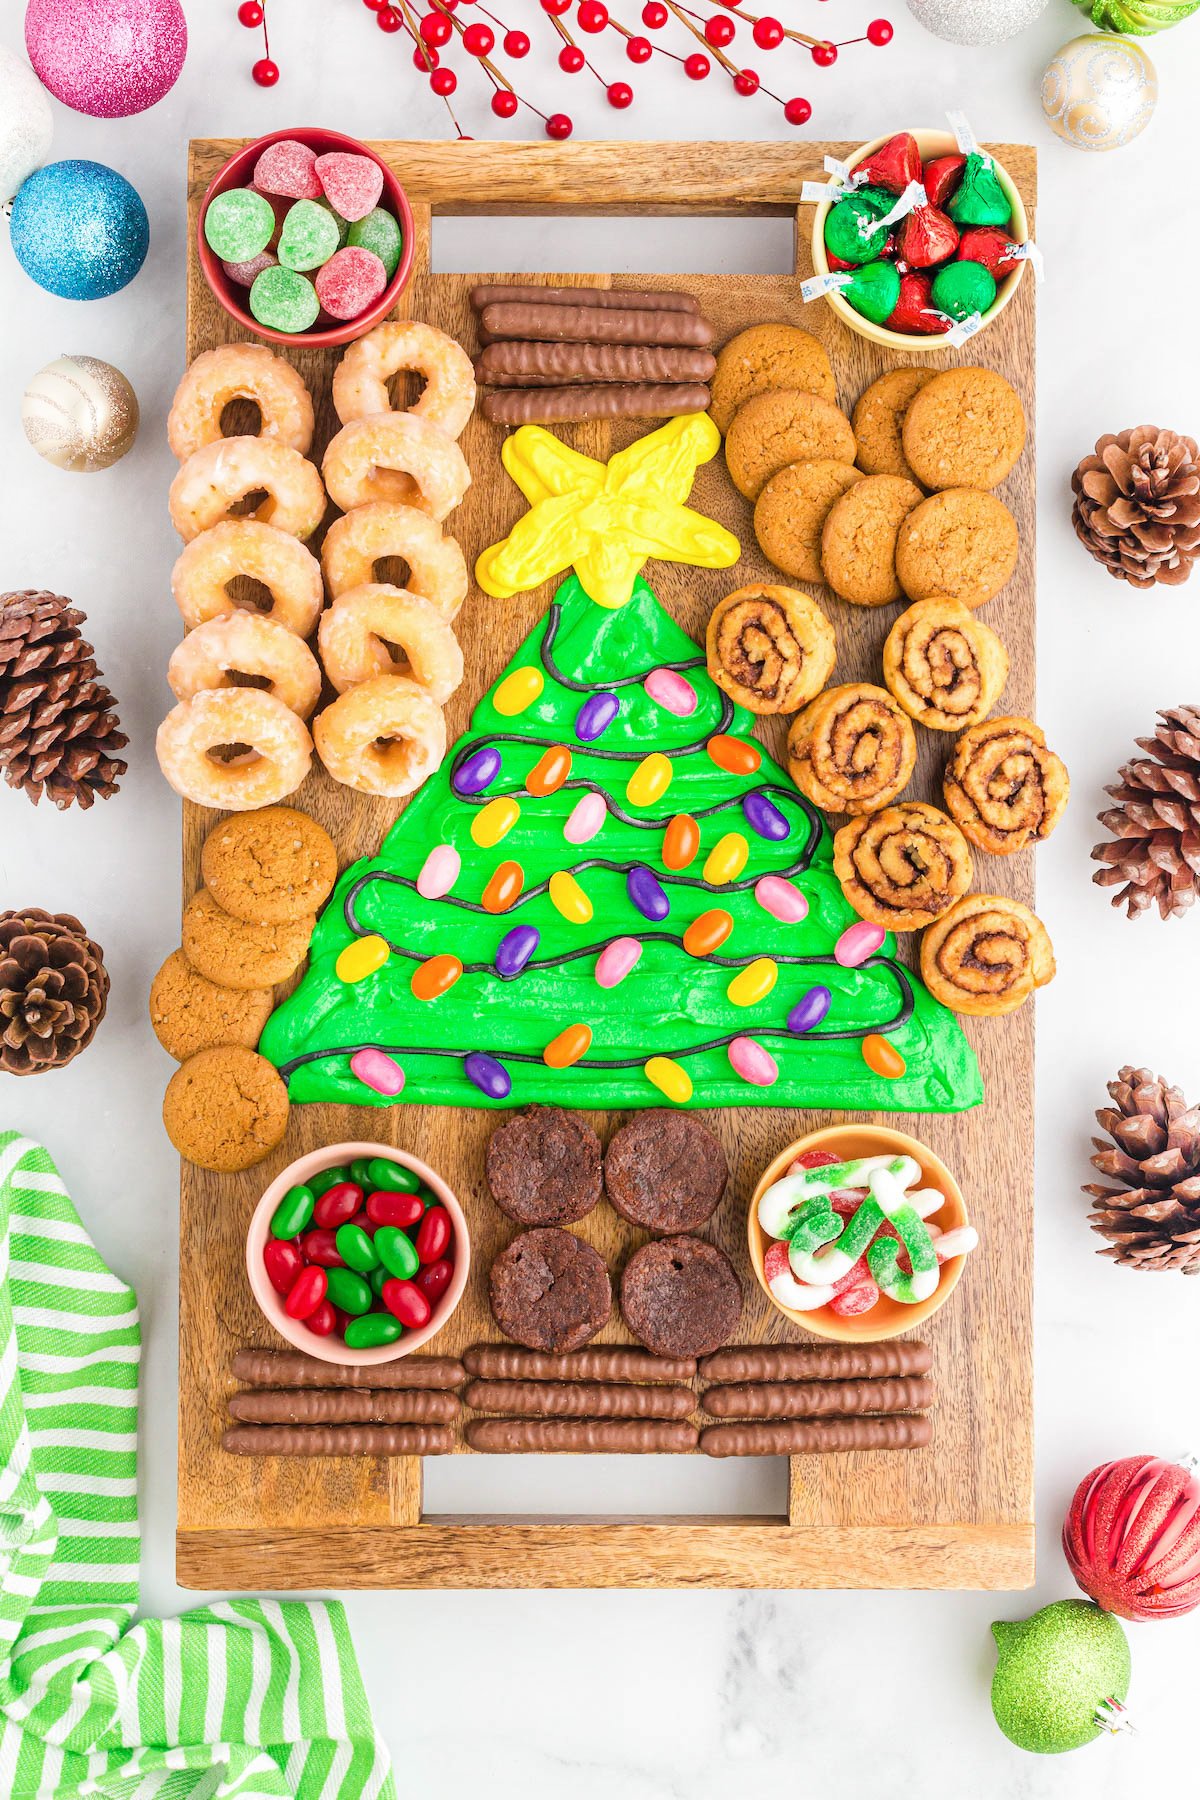 buttercream board with a christmas tree on it and cookies and donuts to dip into it